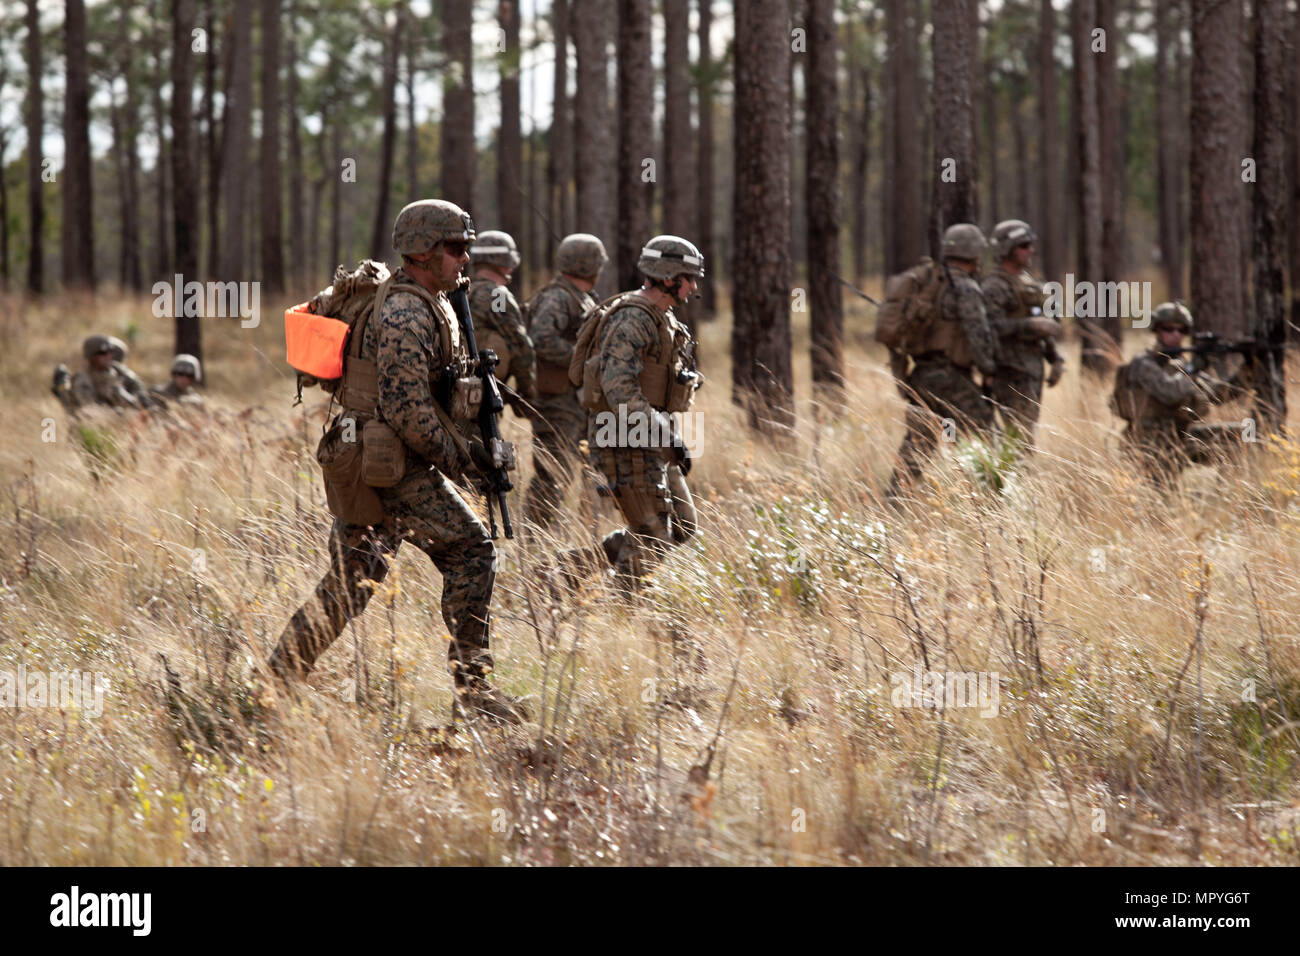 U.S. Marines attached to Advanced Infantry Training Battalion, School of Infantry-East (SOI-E), conduct buddy pair fire and maneuver movements during a combined arms exercise at Camp Lejeune, N.C., April 7, 2017. The mission of SOI-E is to train entry-level and advanced level Marines in the skills required of an Infantry Marine for the operating forces. (U.S. Marine Corps photo by Lance Cpl. Jose Villalobosrocha) Stock Photo